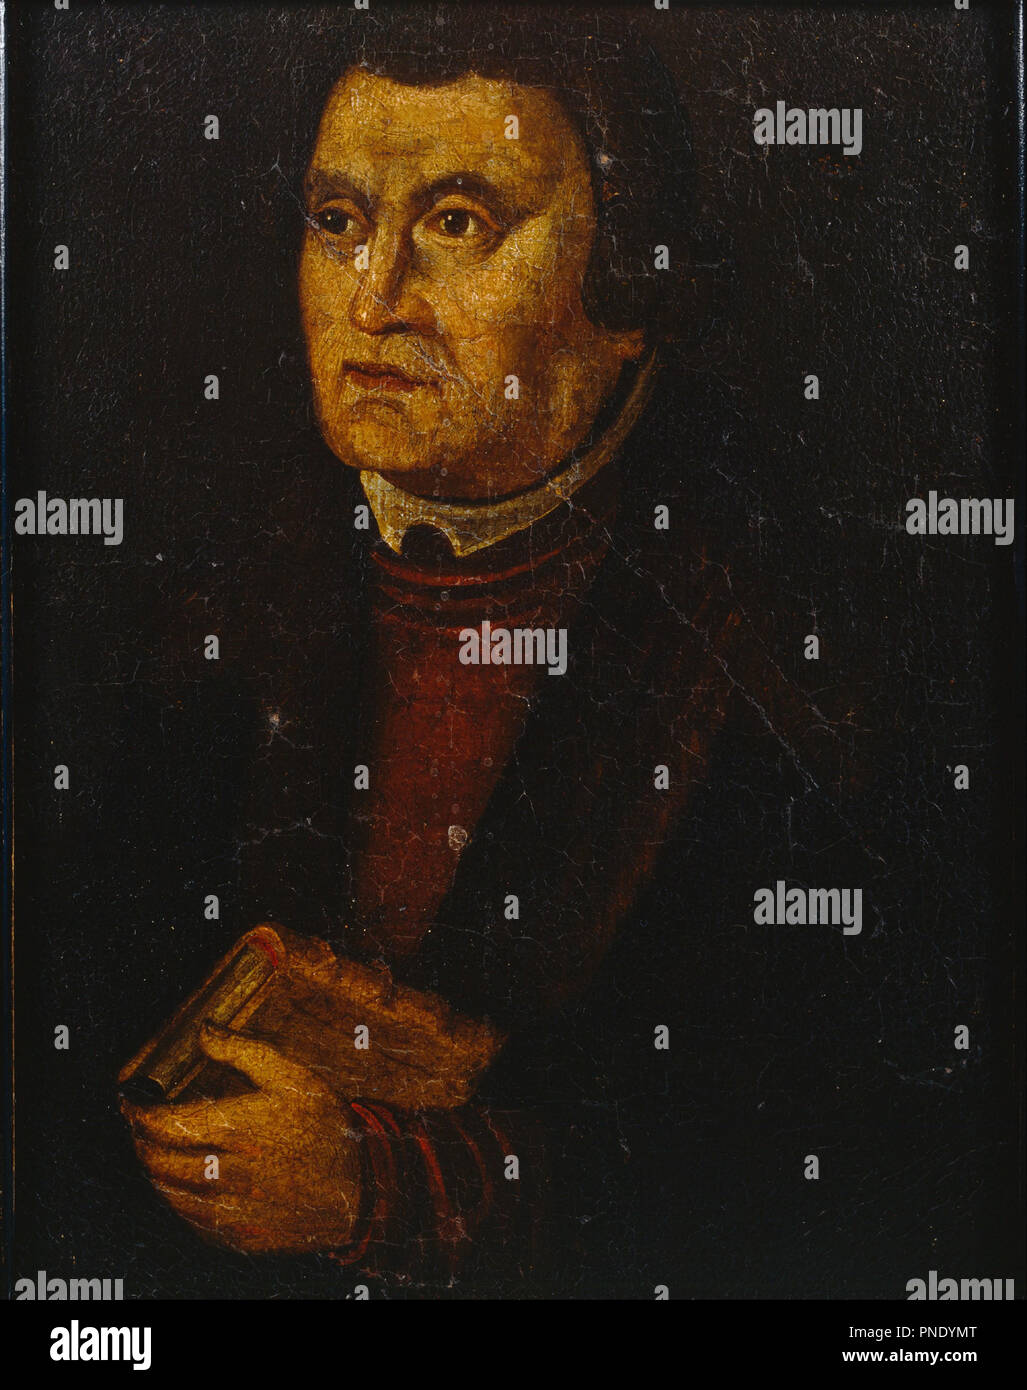 Martin Luther. Date/Period: Before 1626. Painting. Oil on canvas Oil. Height: 340 mm (13.38 in); Width: 269 mm (10.59 in). Author: British School. Stock Photo